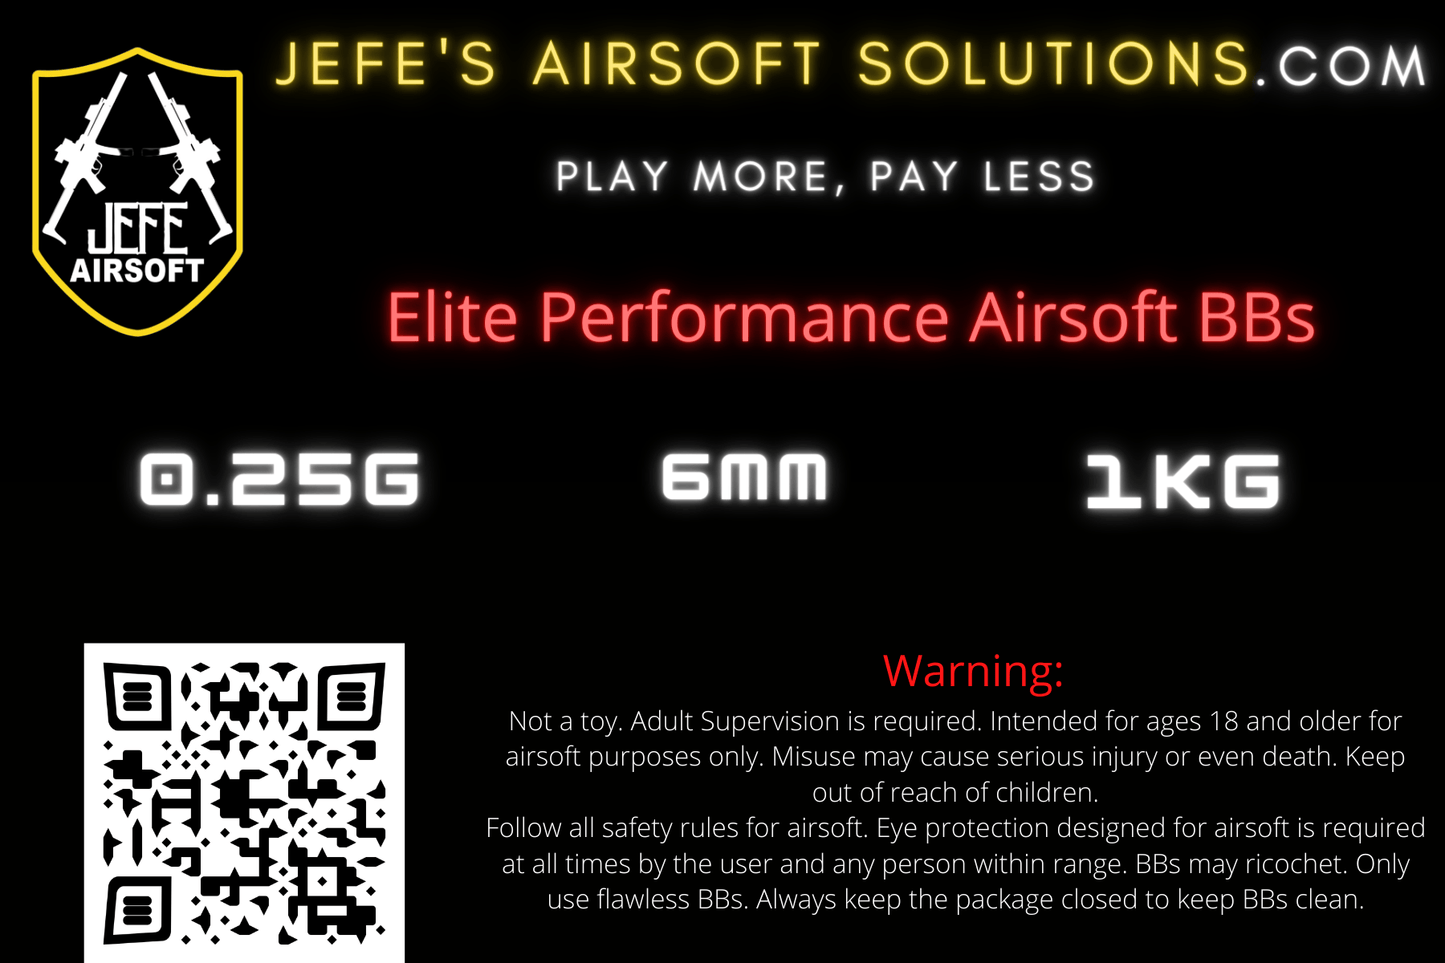 Elite Airsoft BBs - 0.25g 1kg - Jefe's Airsoft Solutionsbbslabor daysubscription